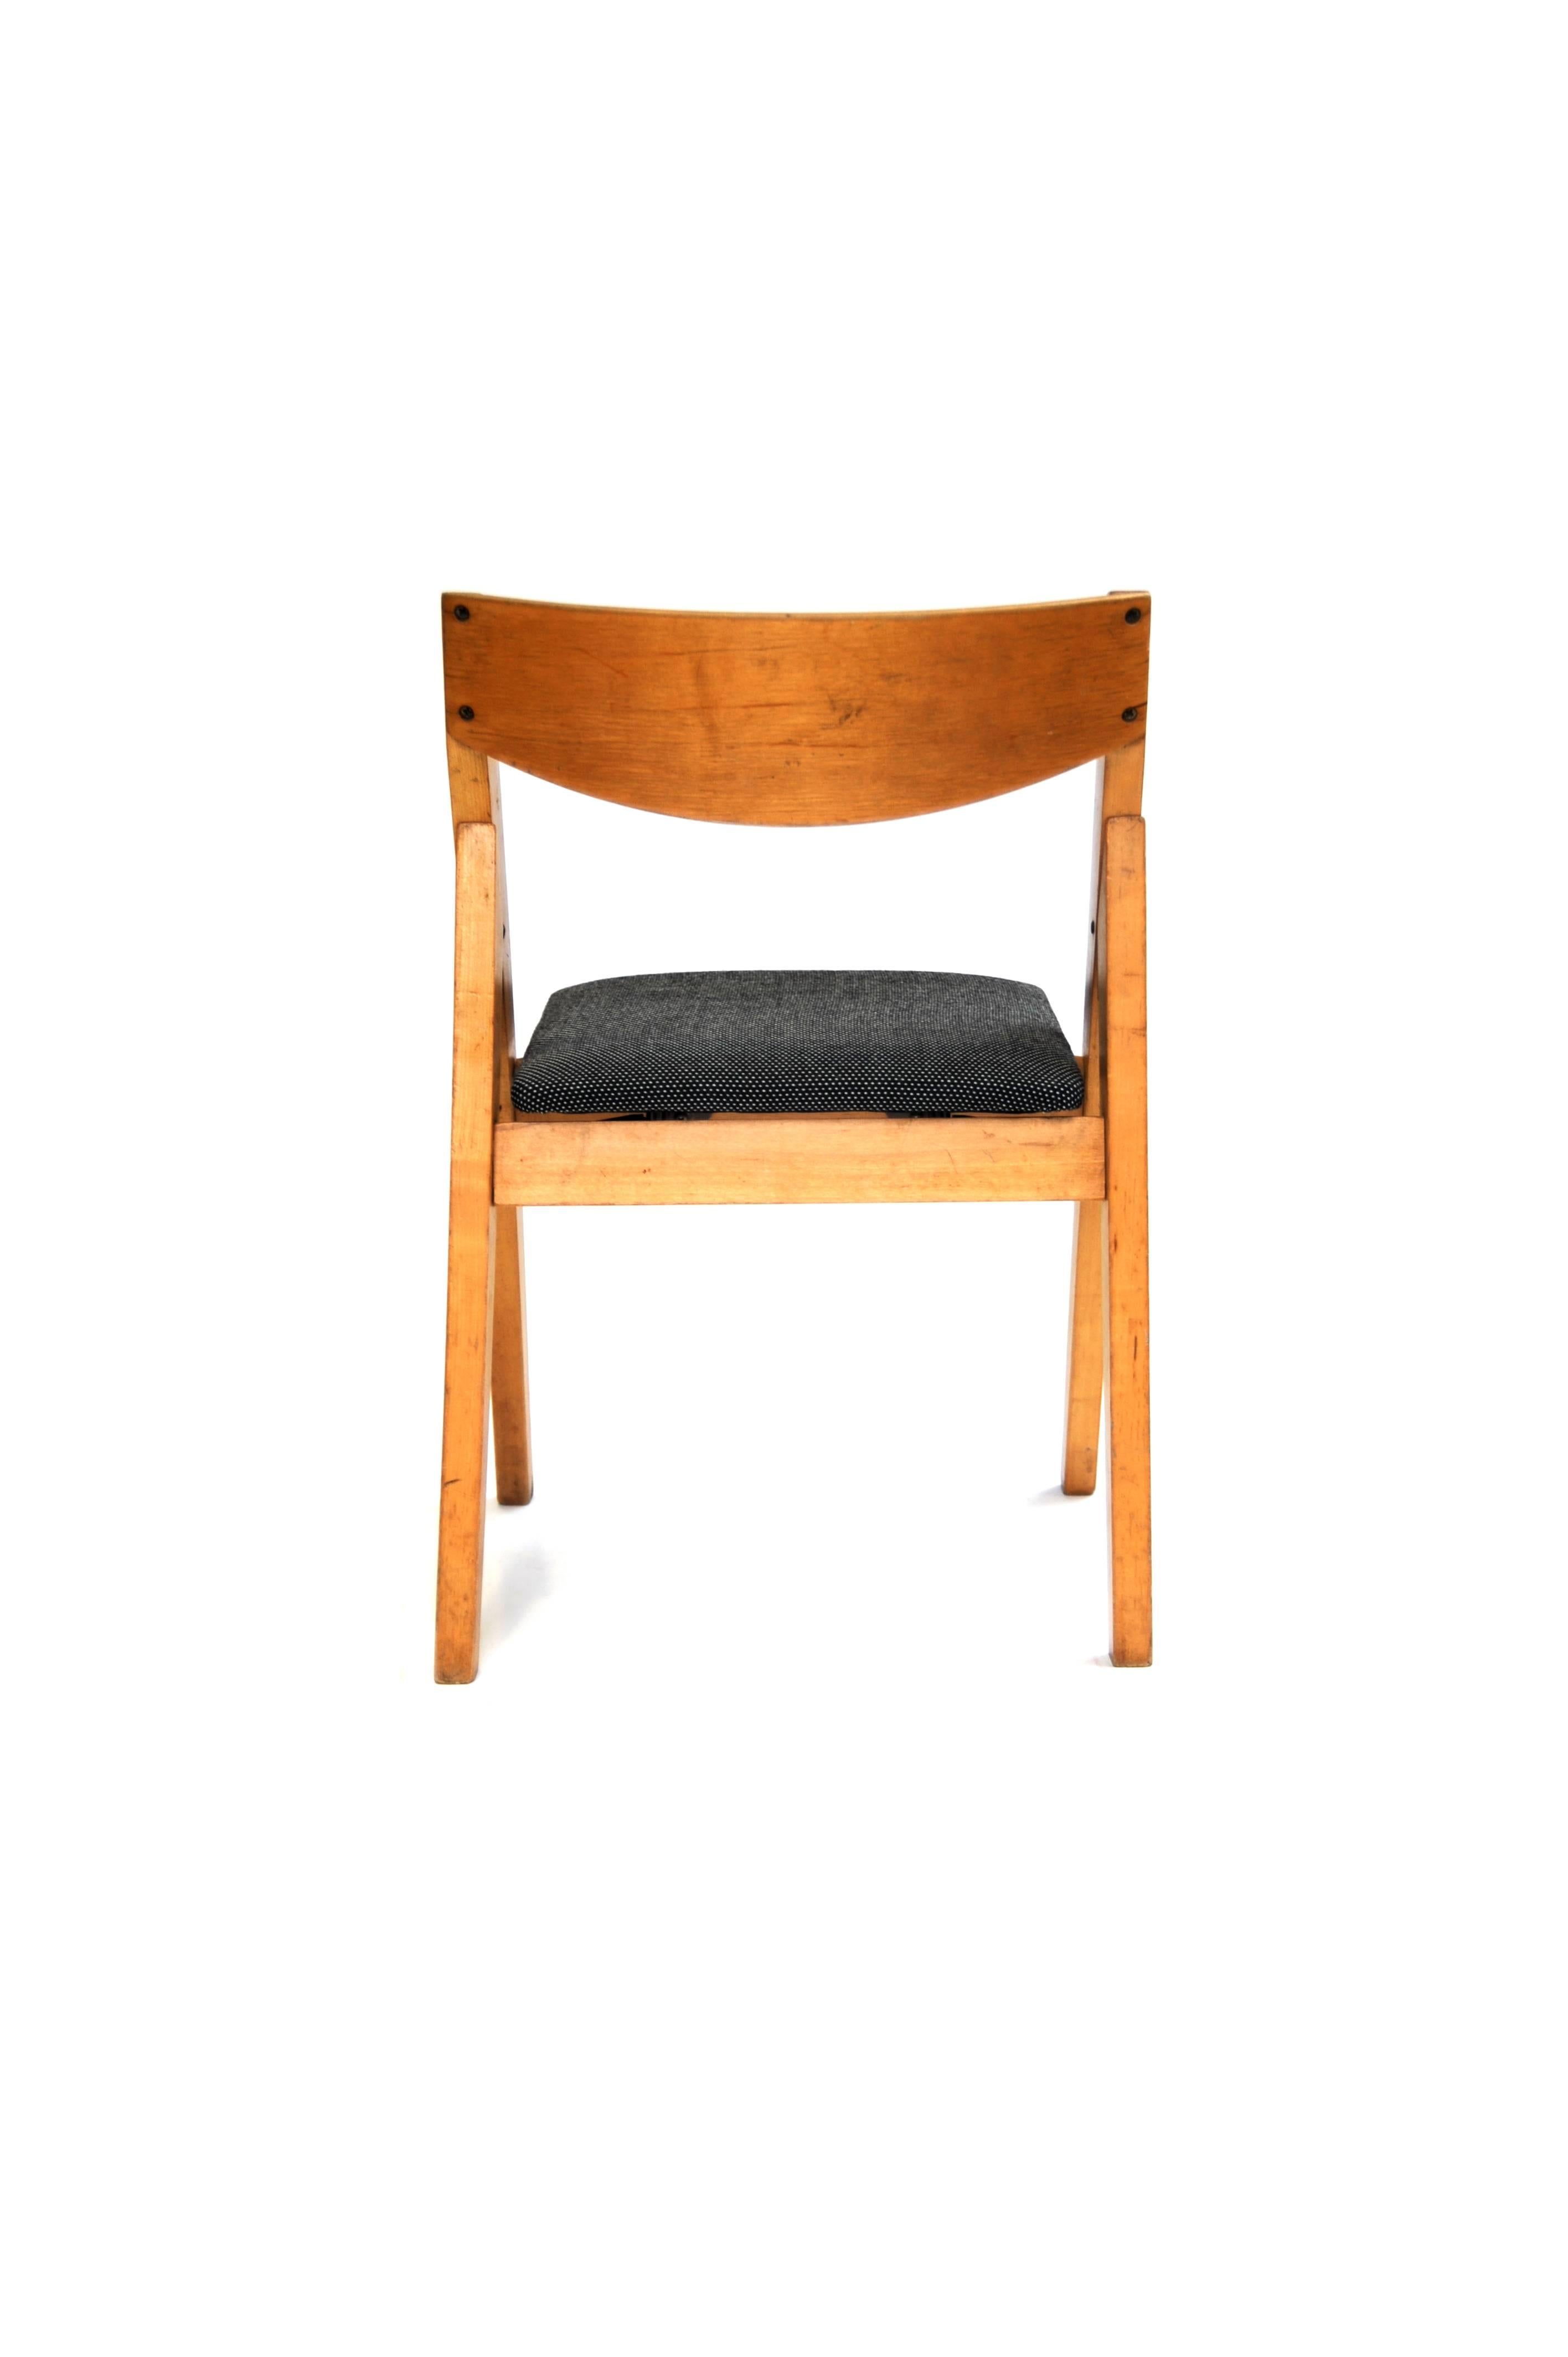 20th Century Folding Child Chair in Wood with Seat in New White or Black Maharam Fabric For Sale